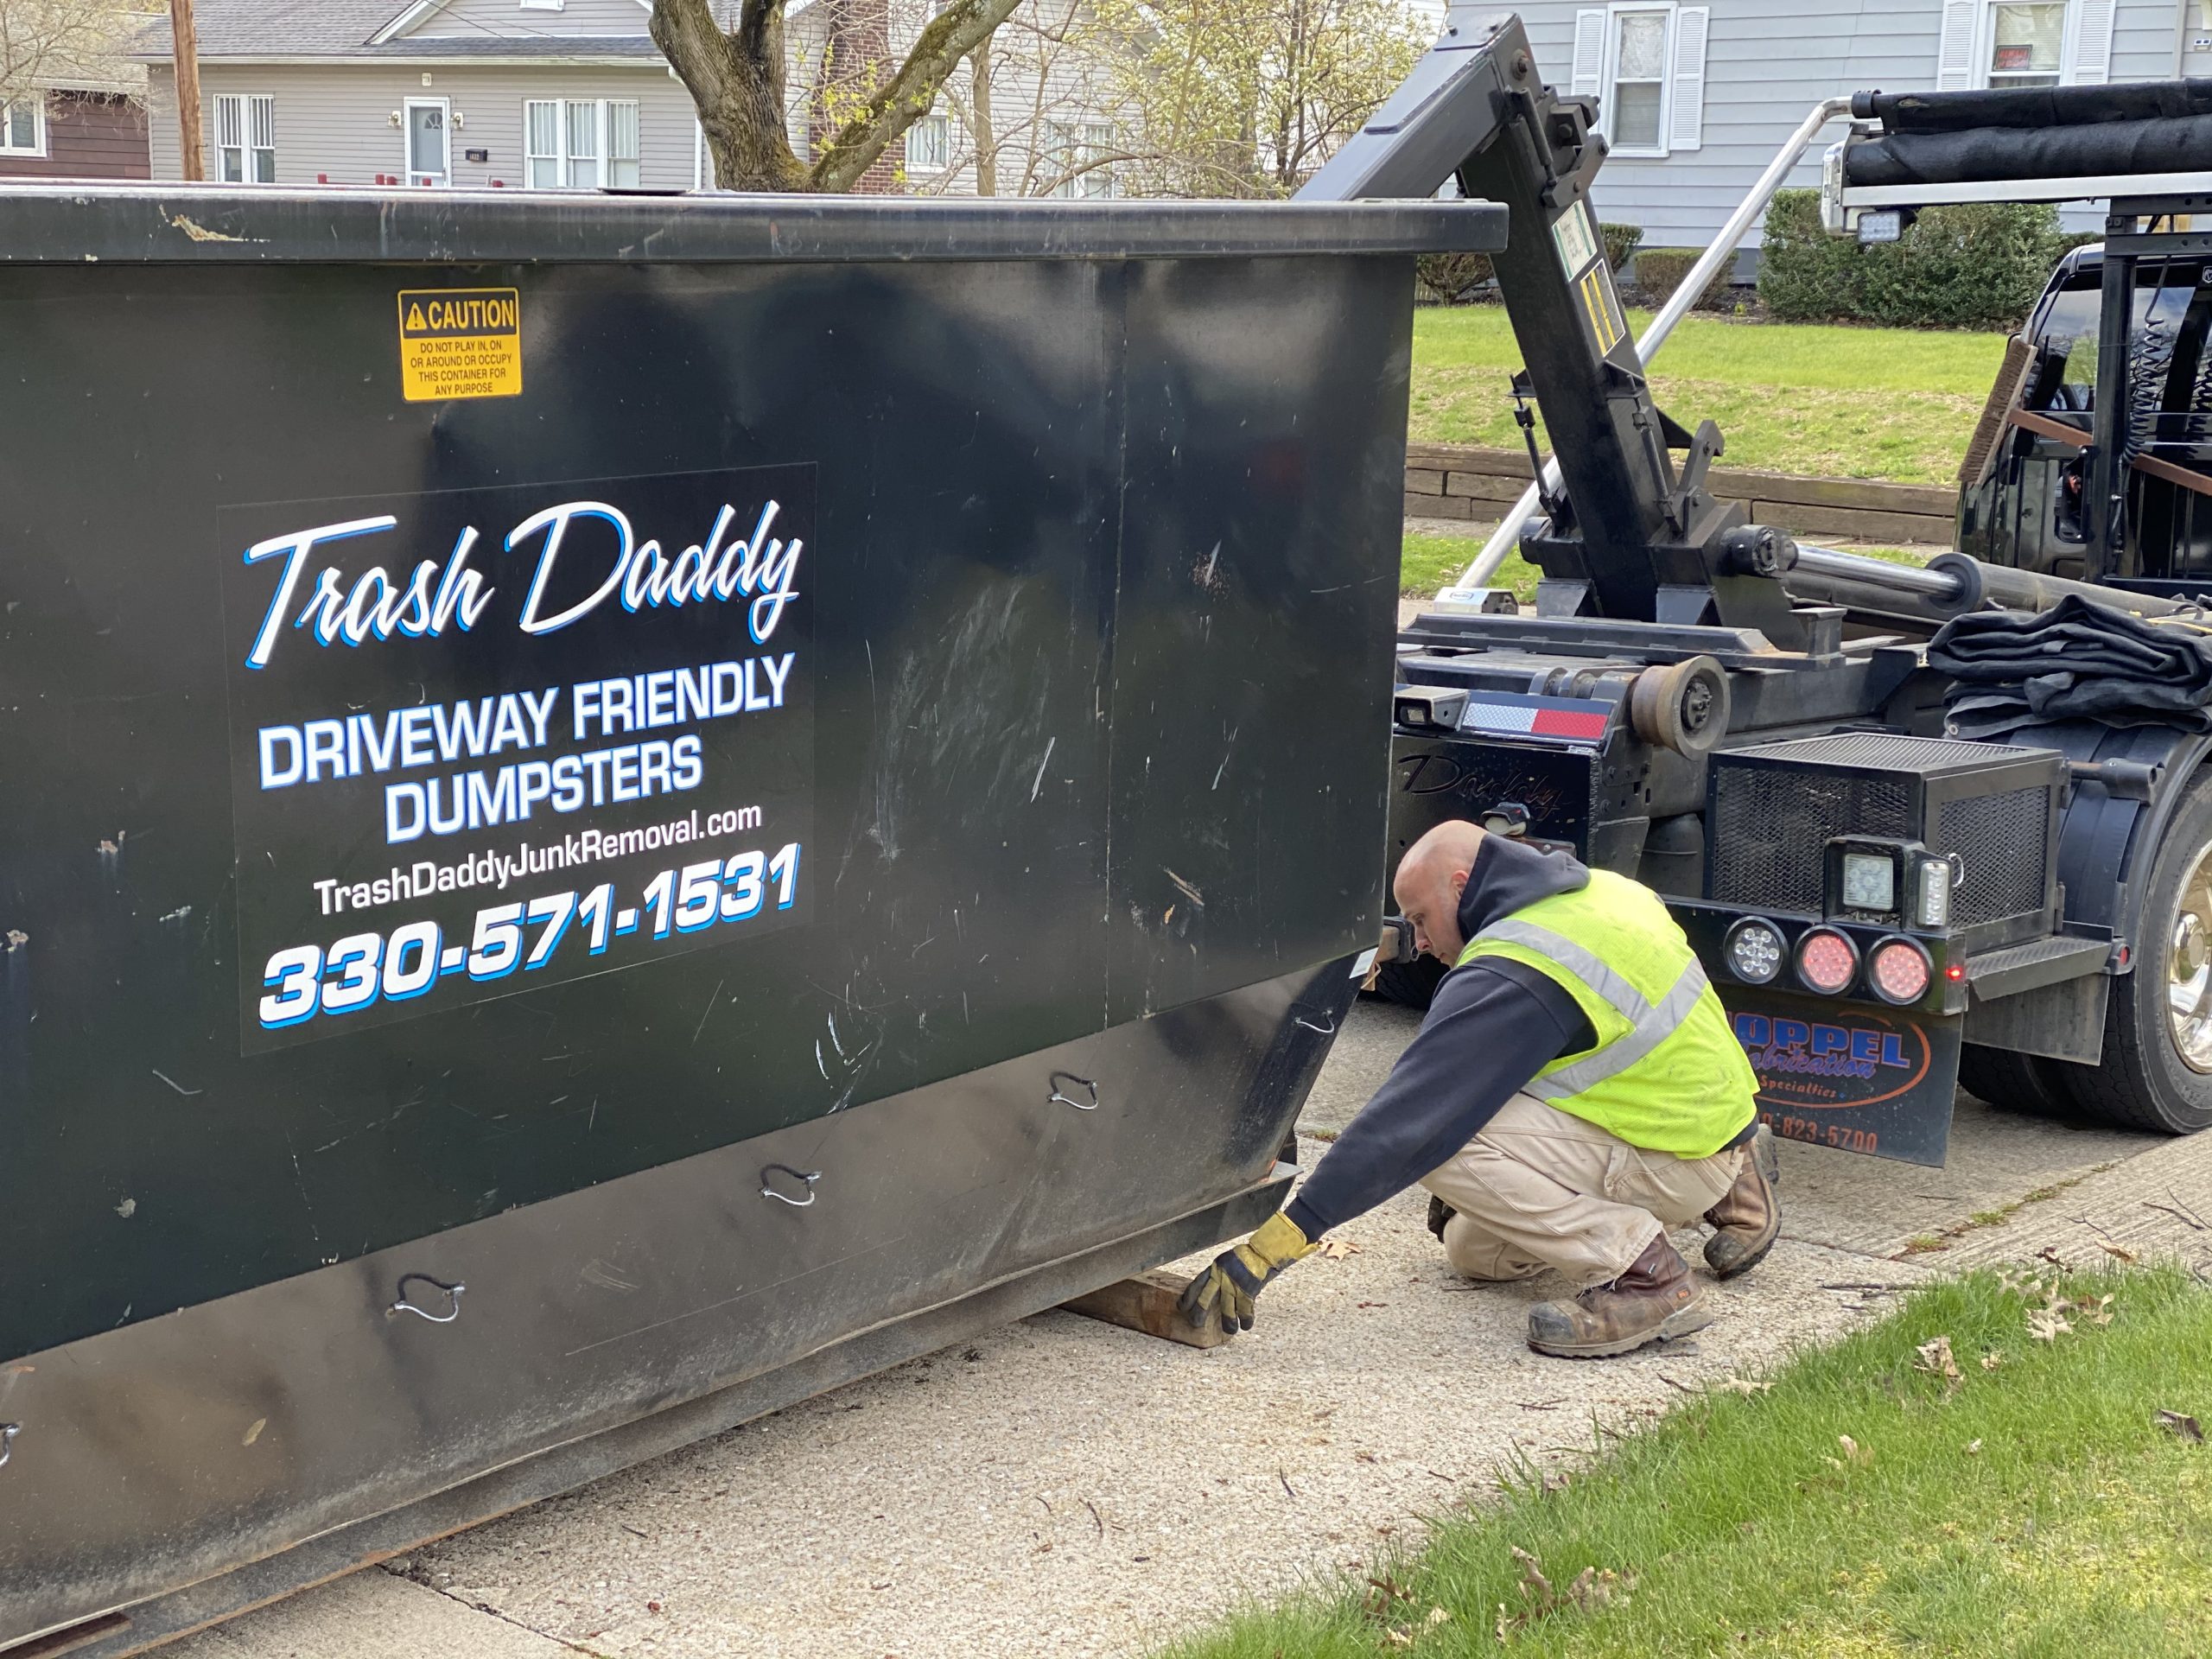 Trash Daddy Dumpster Checking Wood Under Dumpster in a Residential Driveway